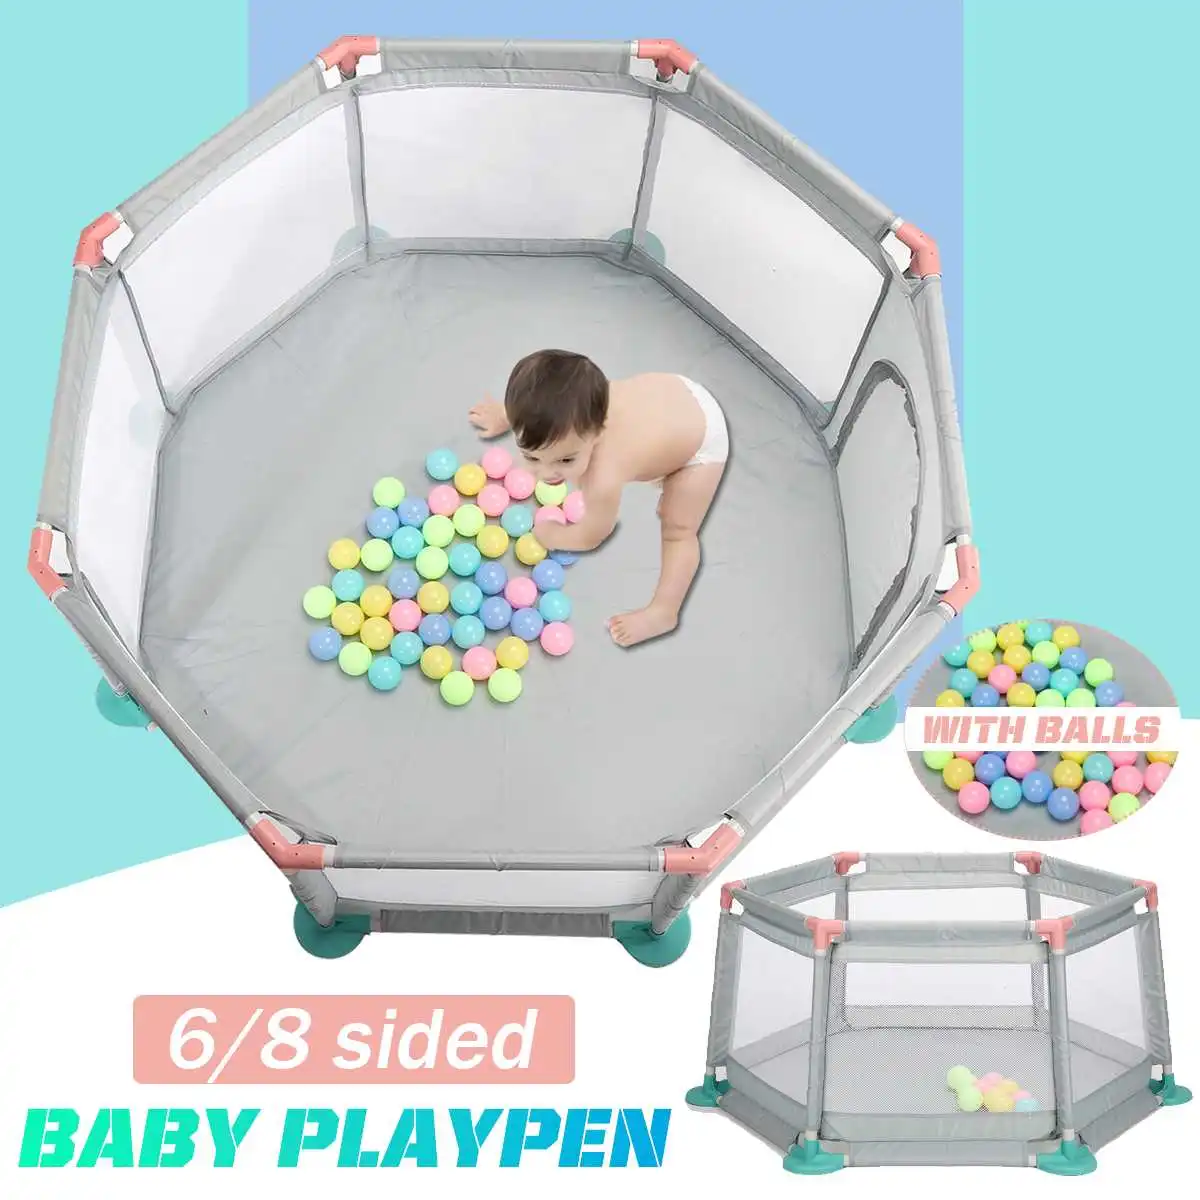 Baby Furniture Playpen For Children Large Dry Pool Baby Playpen Safety Indoor Barriers Home Playground Park For 0-6 Old SALE